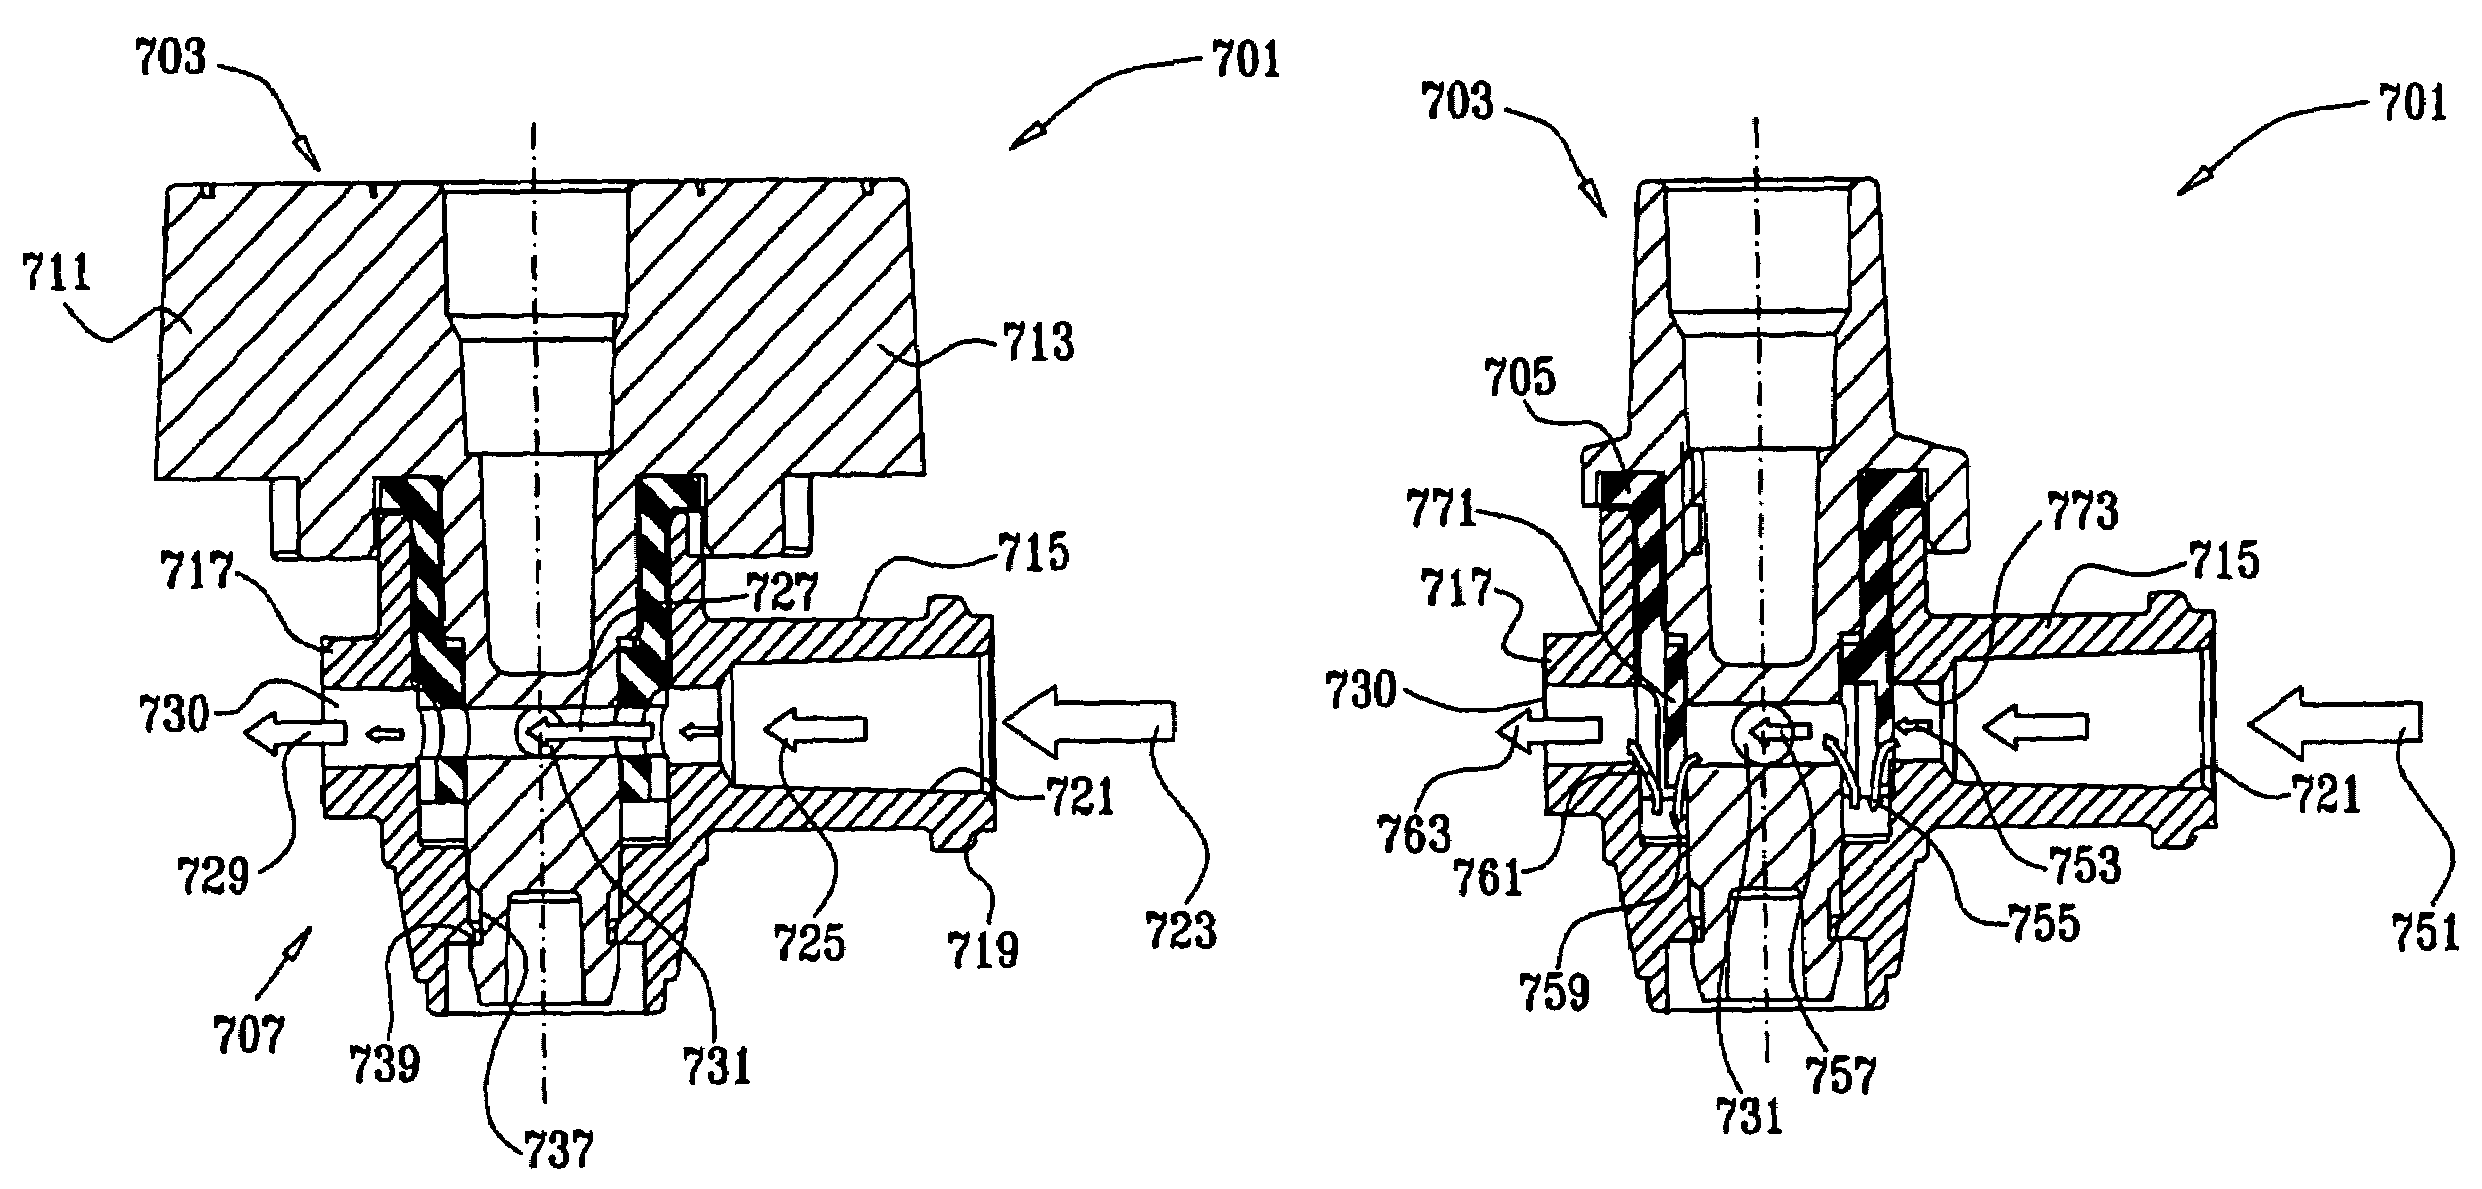 Anesthesia manifold and induction valve